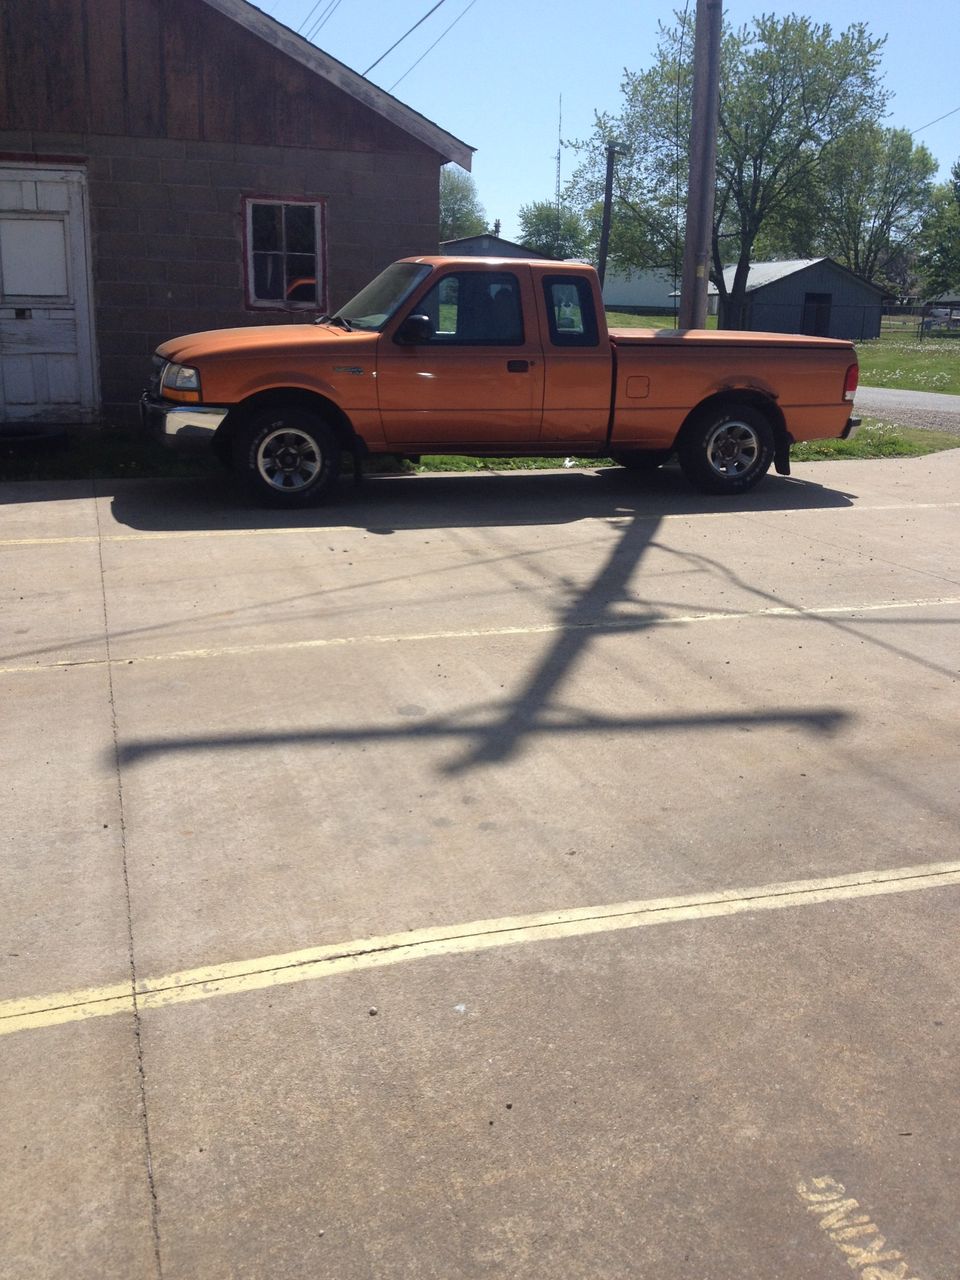 2000 Ford Ranger | Versailles, IL, Harvest Gold Clearcoat Metallic (Gold & Cream)